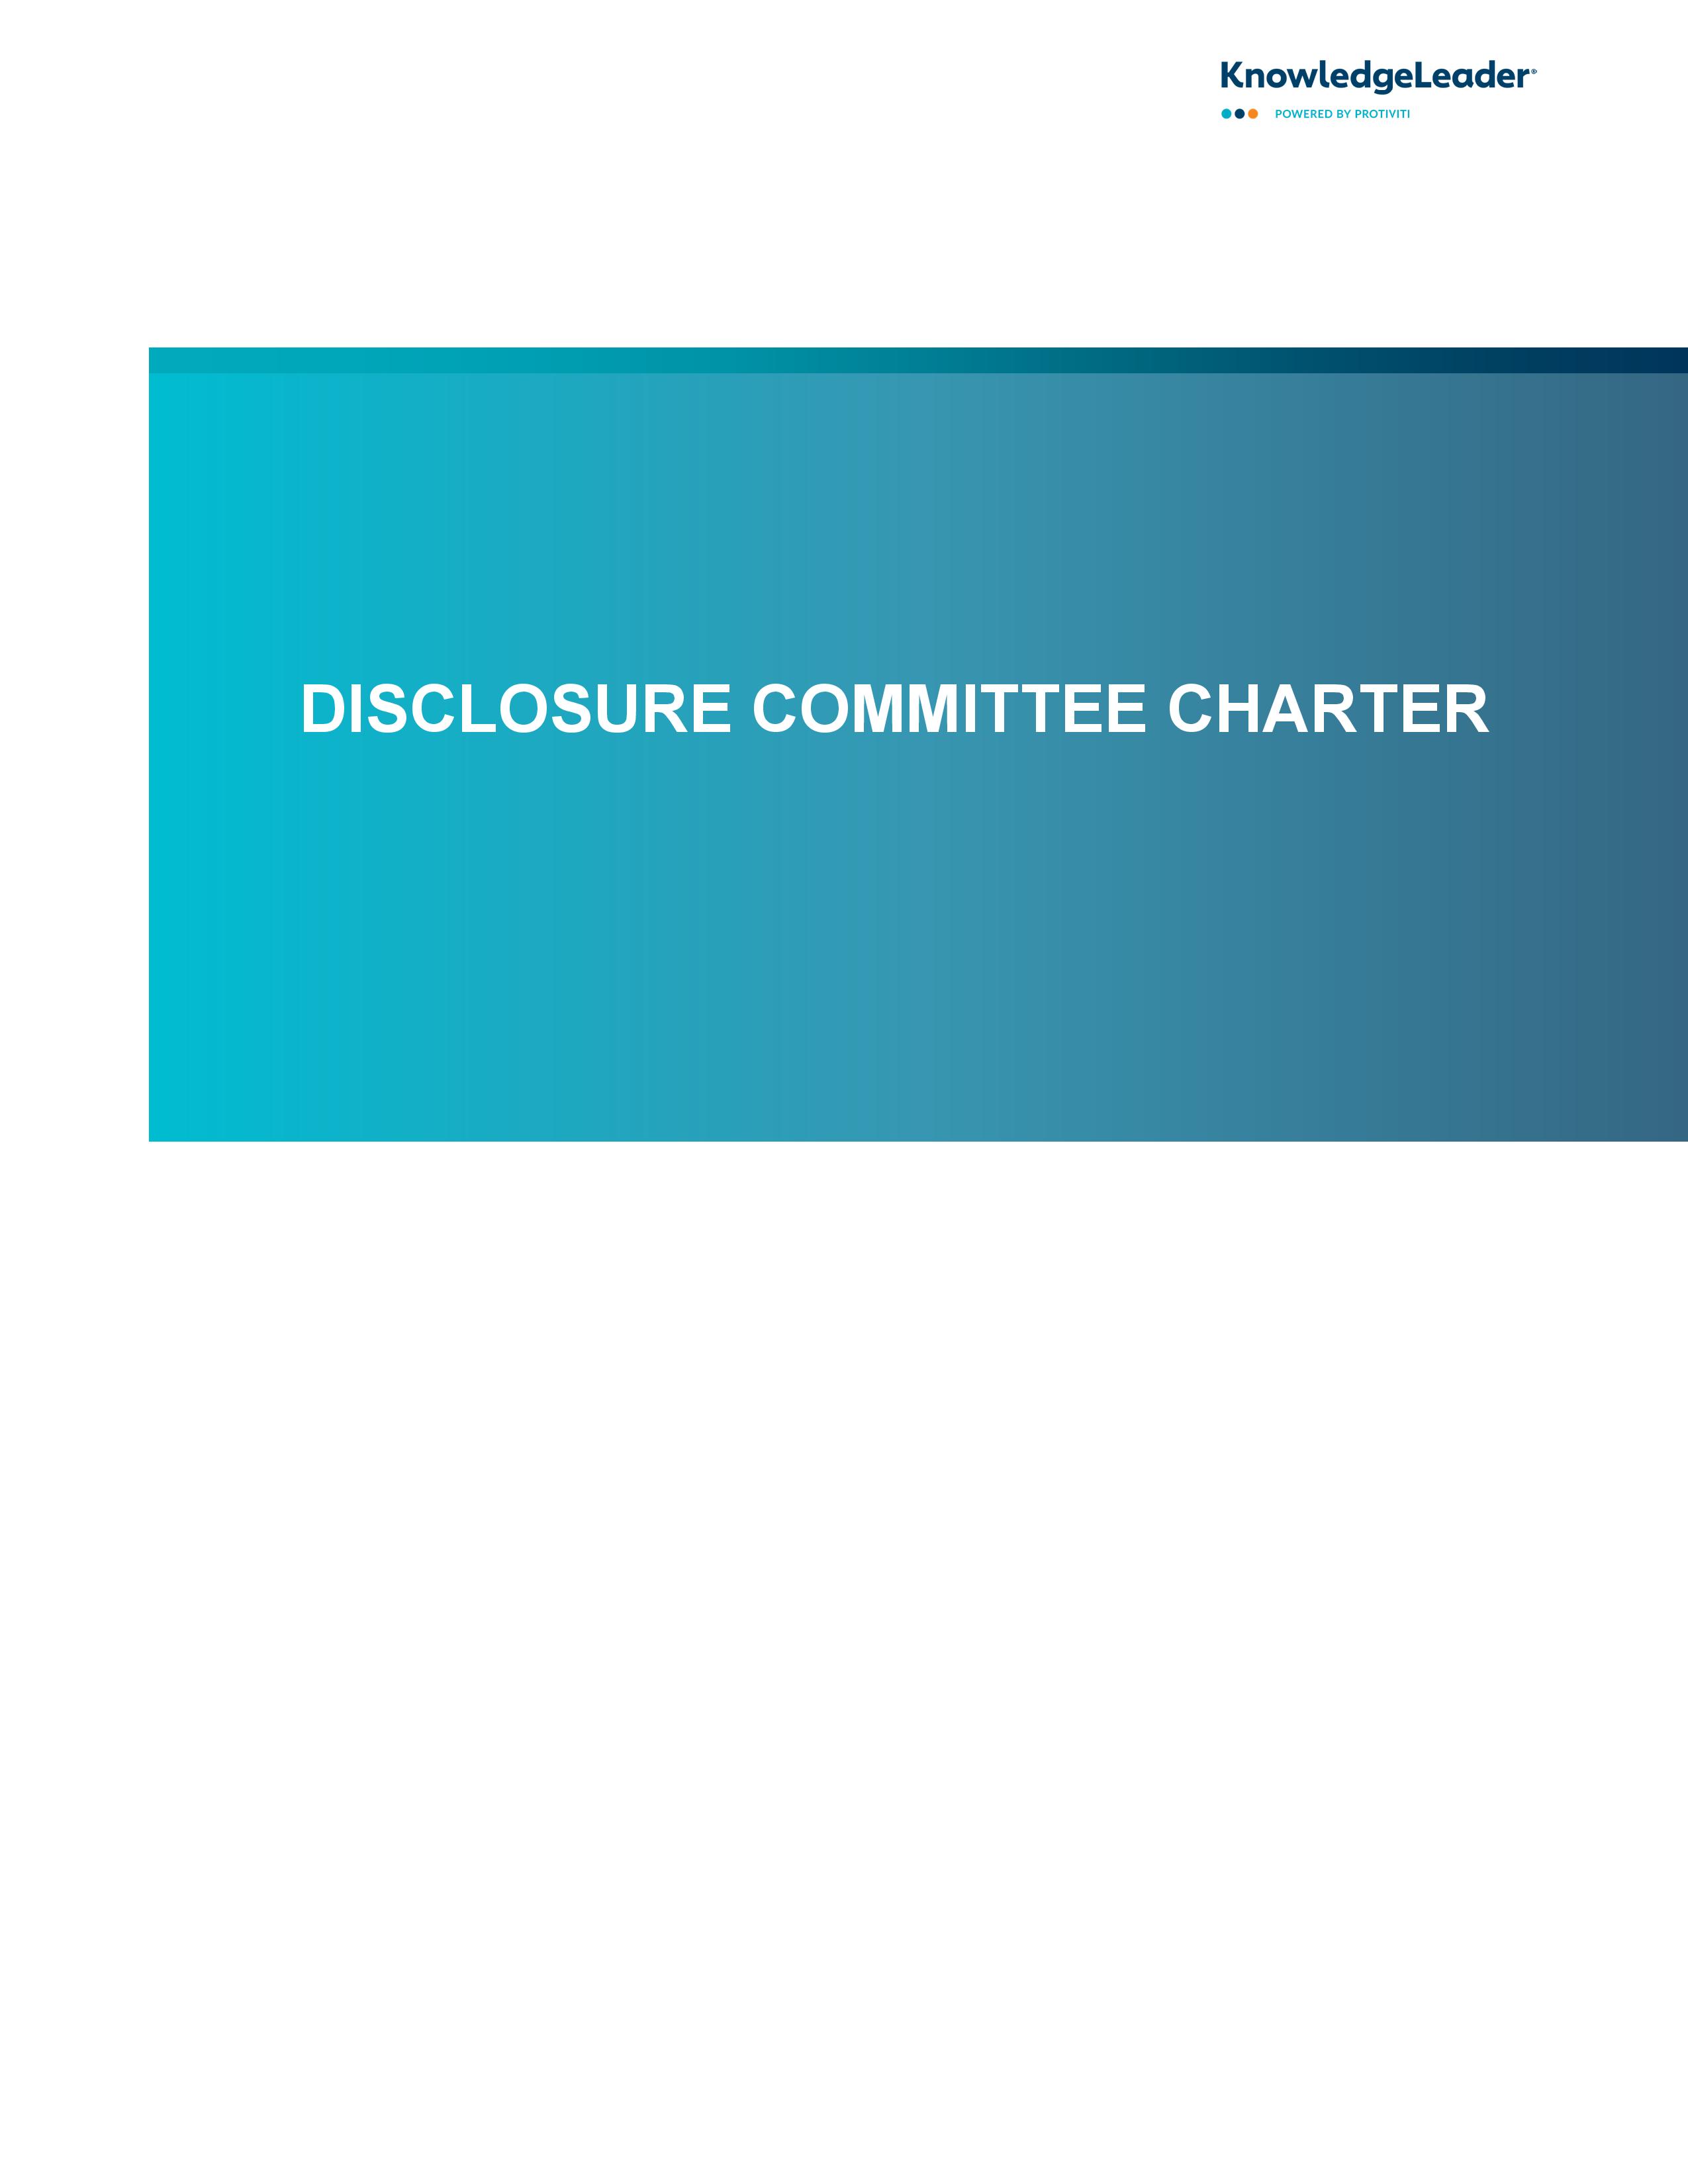 screenshot of the first page of Disclosure Committee Charter